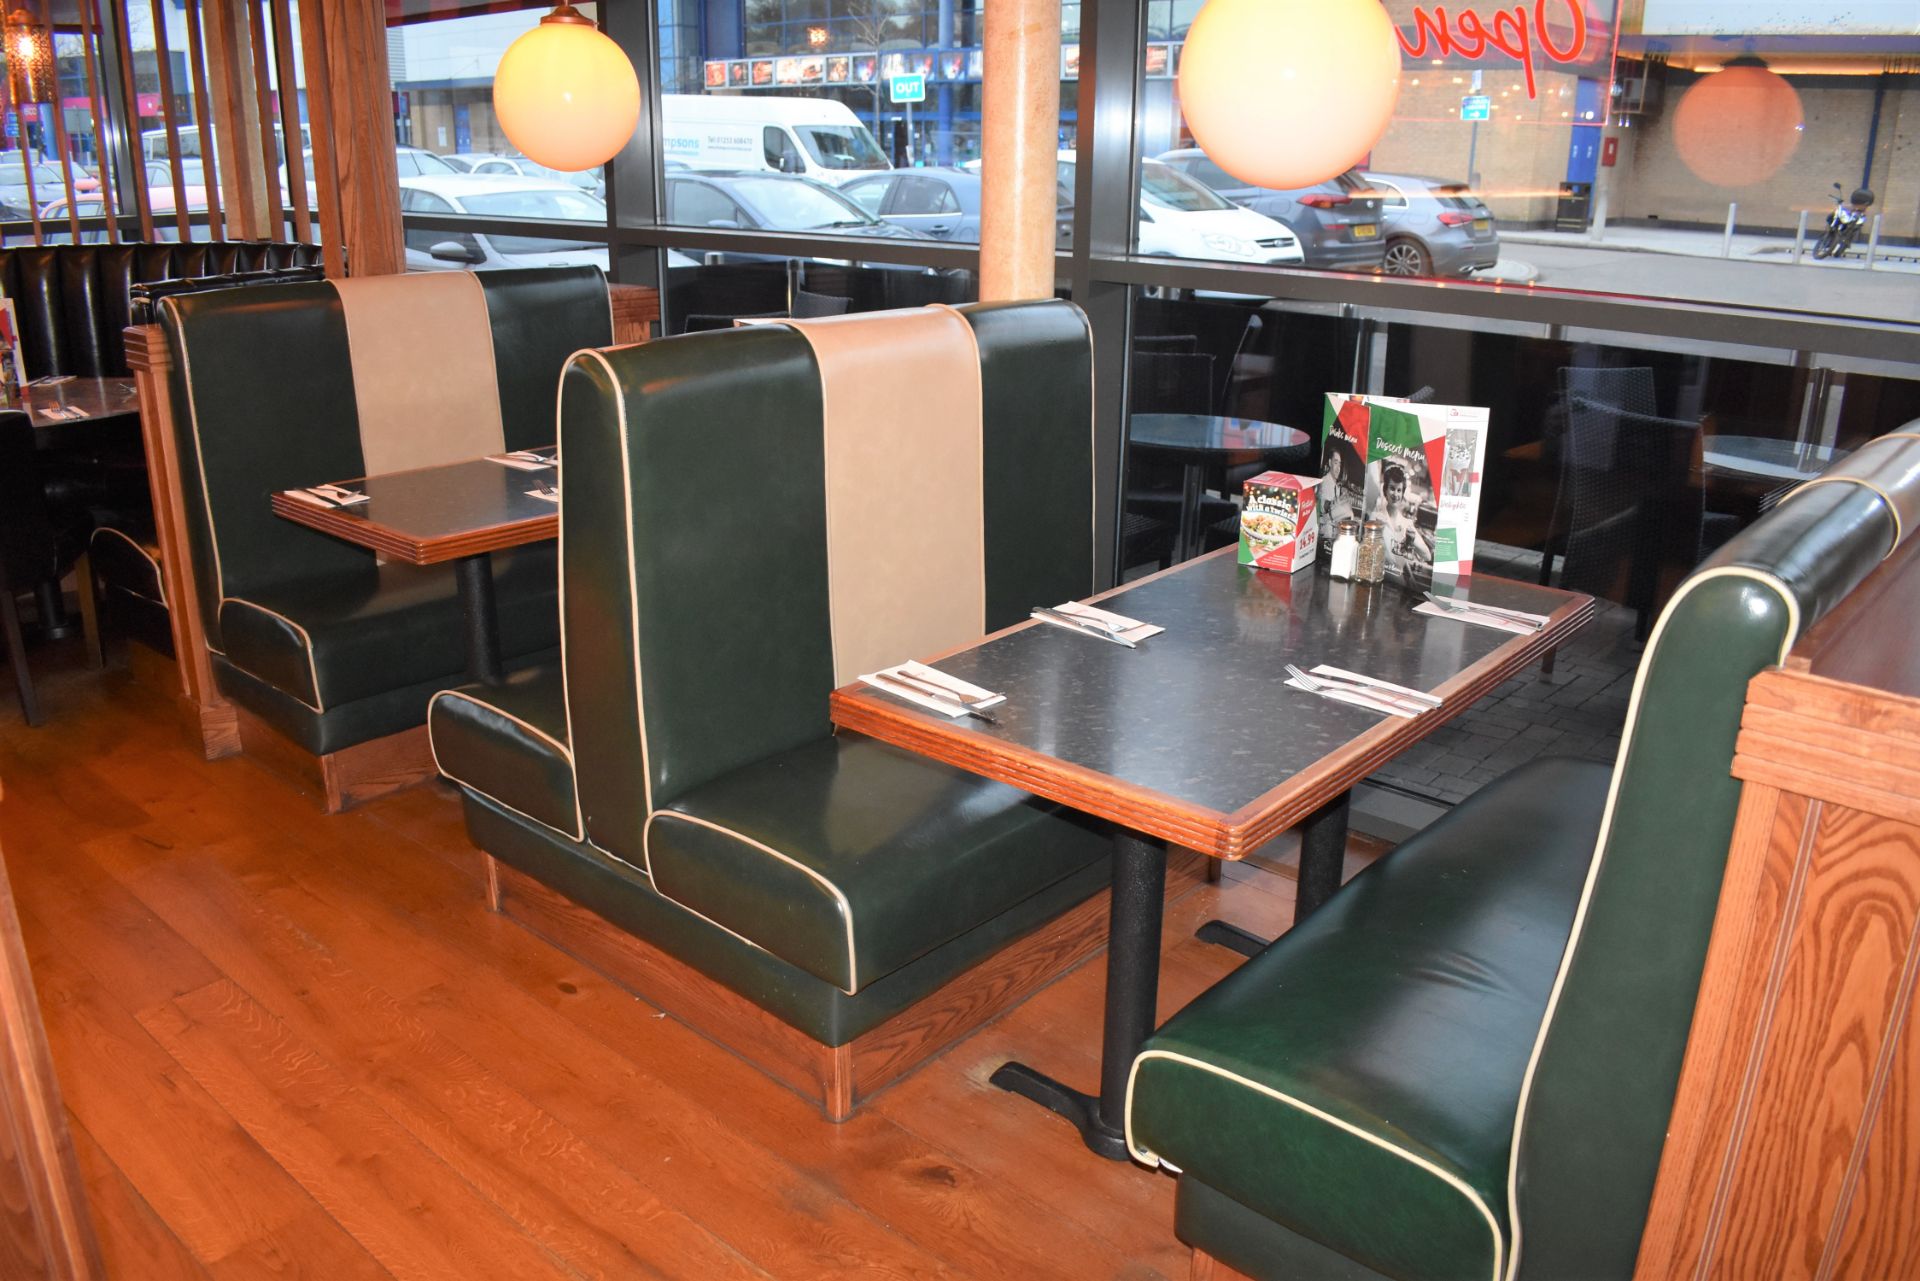 3 x Sections of Booth Seating - Upholstered in a Green and Cream Retro Style Faux Leather Upholstery - Image 2 of 6